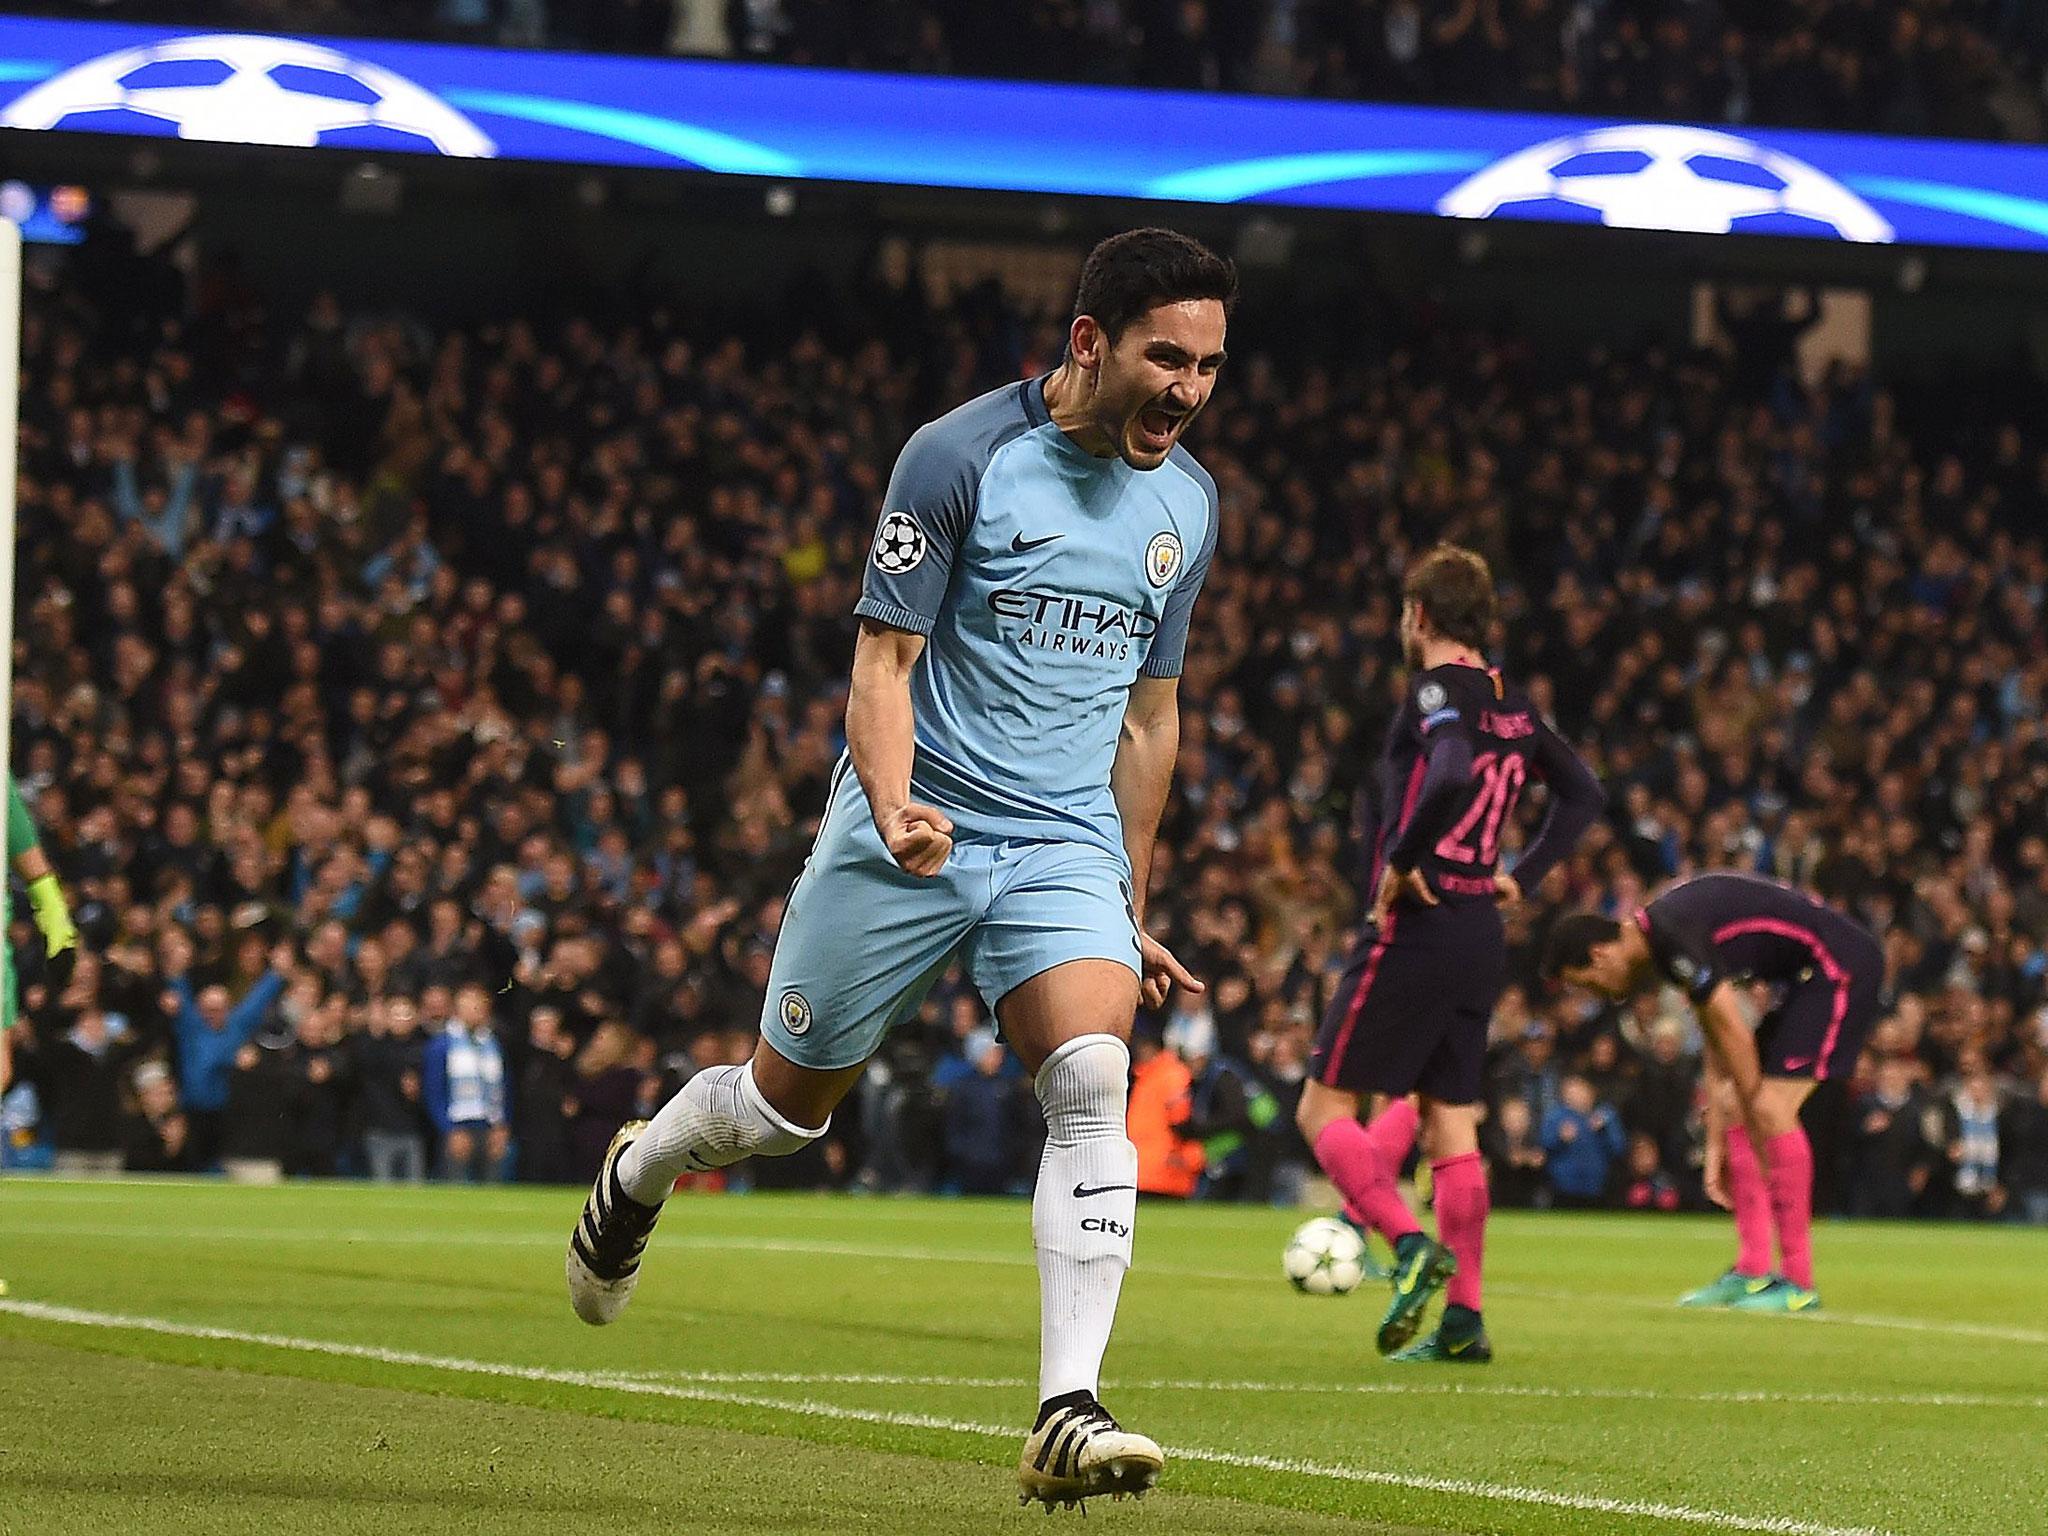 Manchester City and Barcelona go head-to-head once again